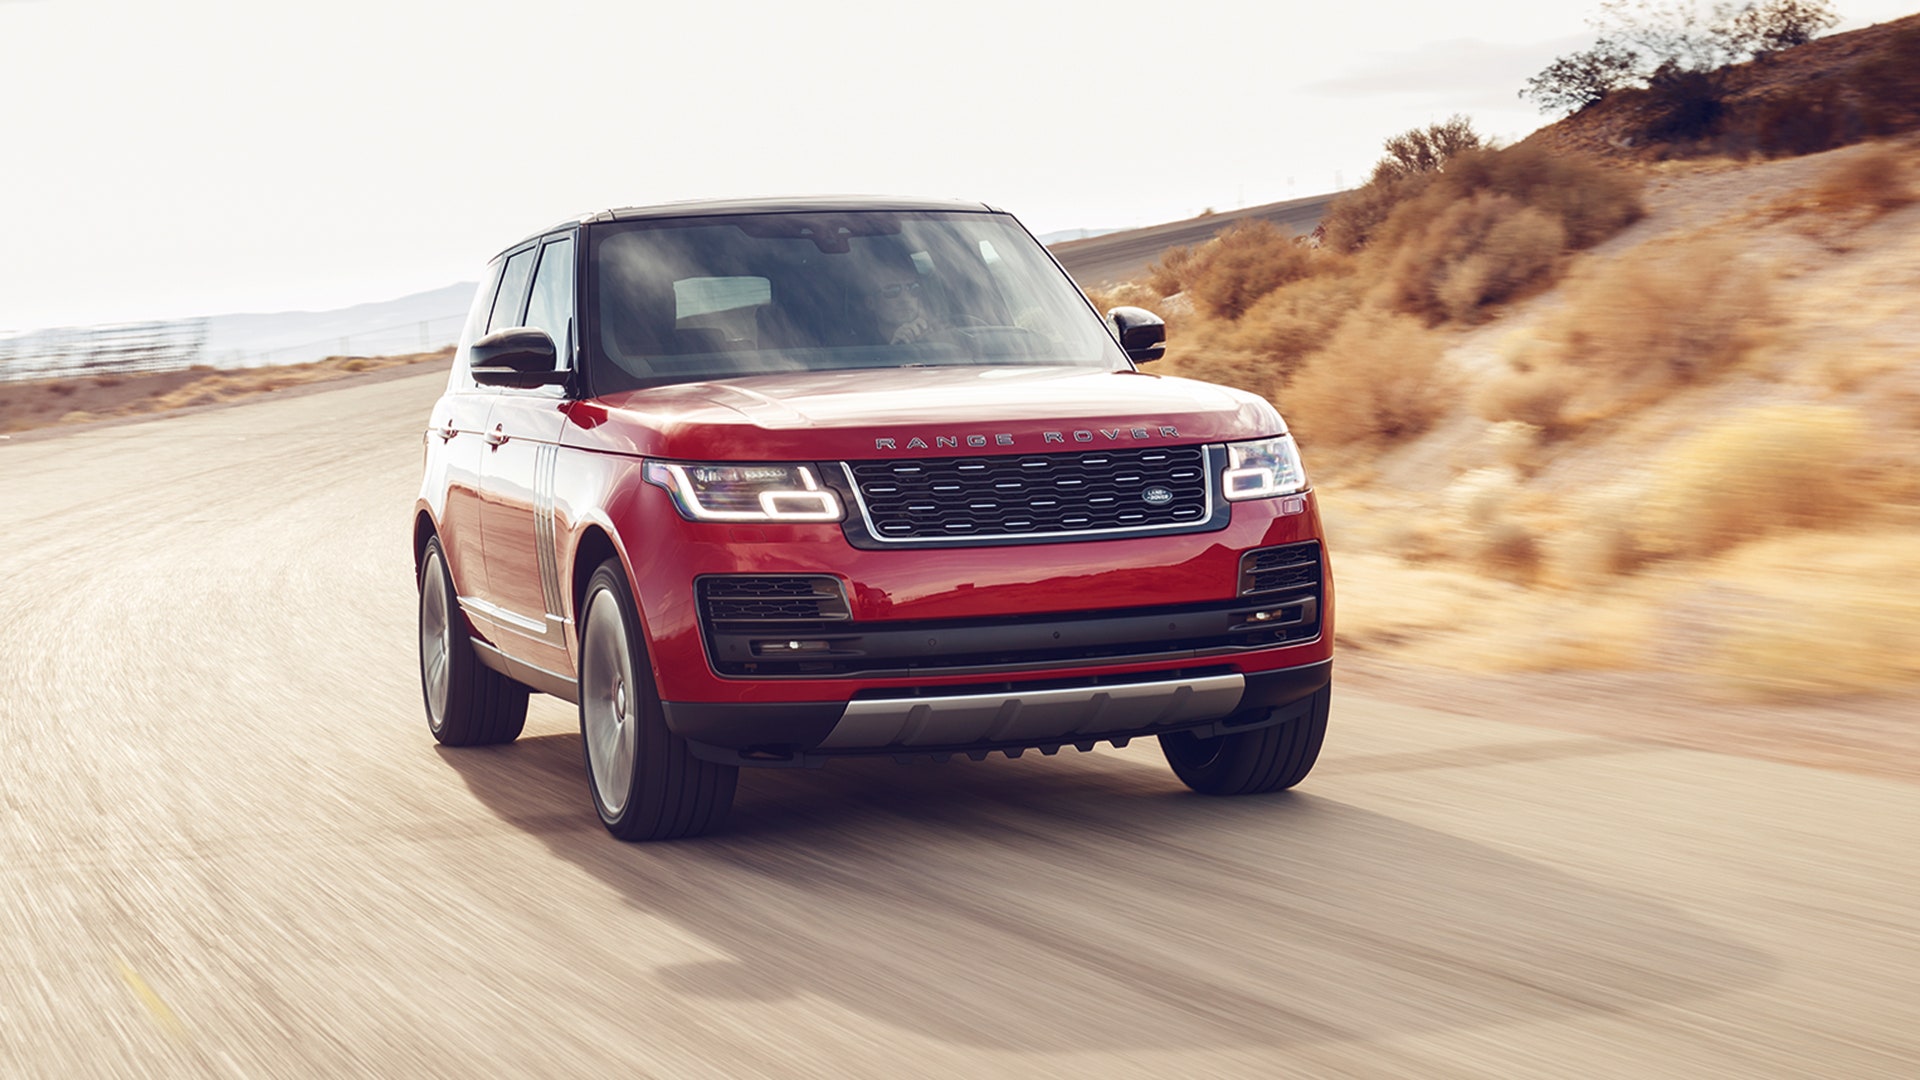 The New Range Rover Autobiography Dynamic Is Part Home Cinema